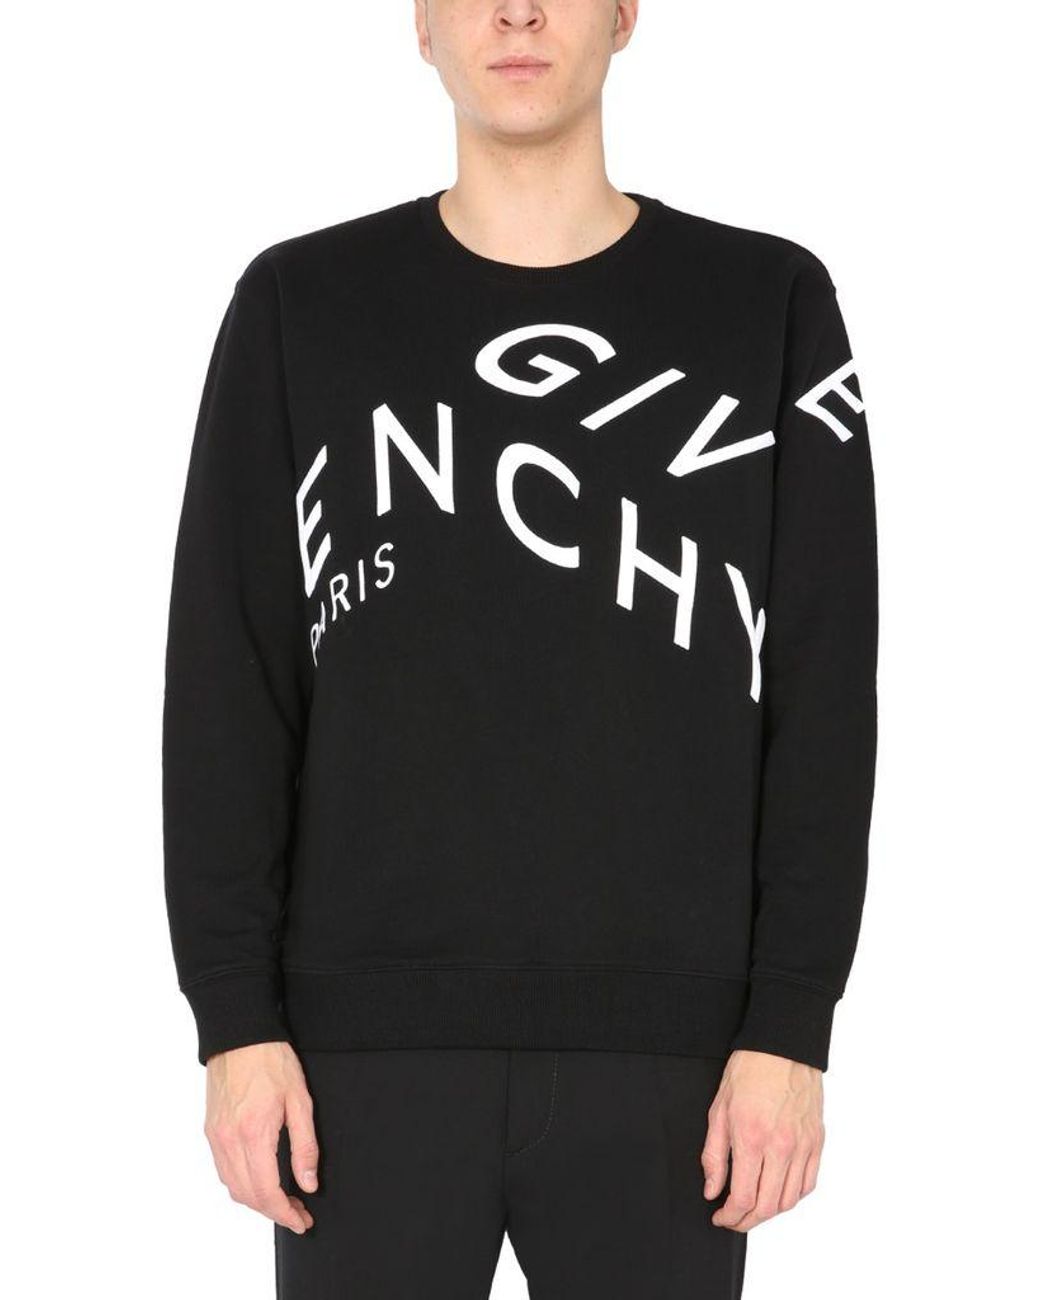 Givenchy Cotton Crew Neck Sweatshirt in Black for Men - Lyst